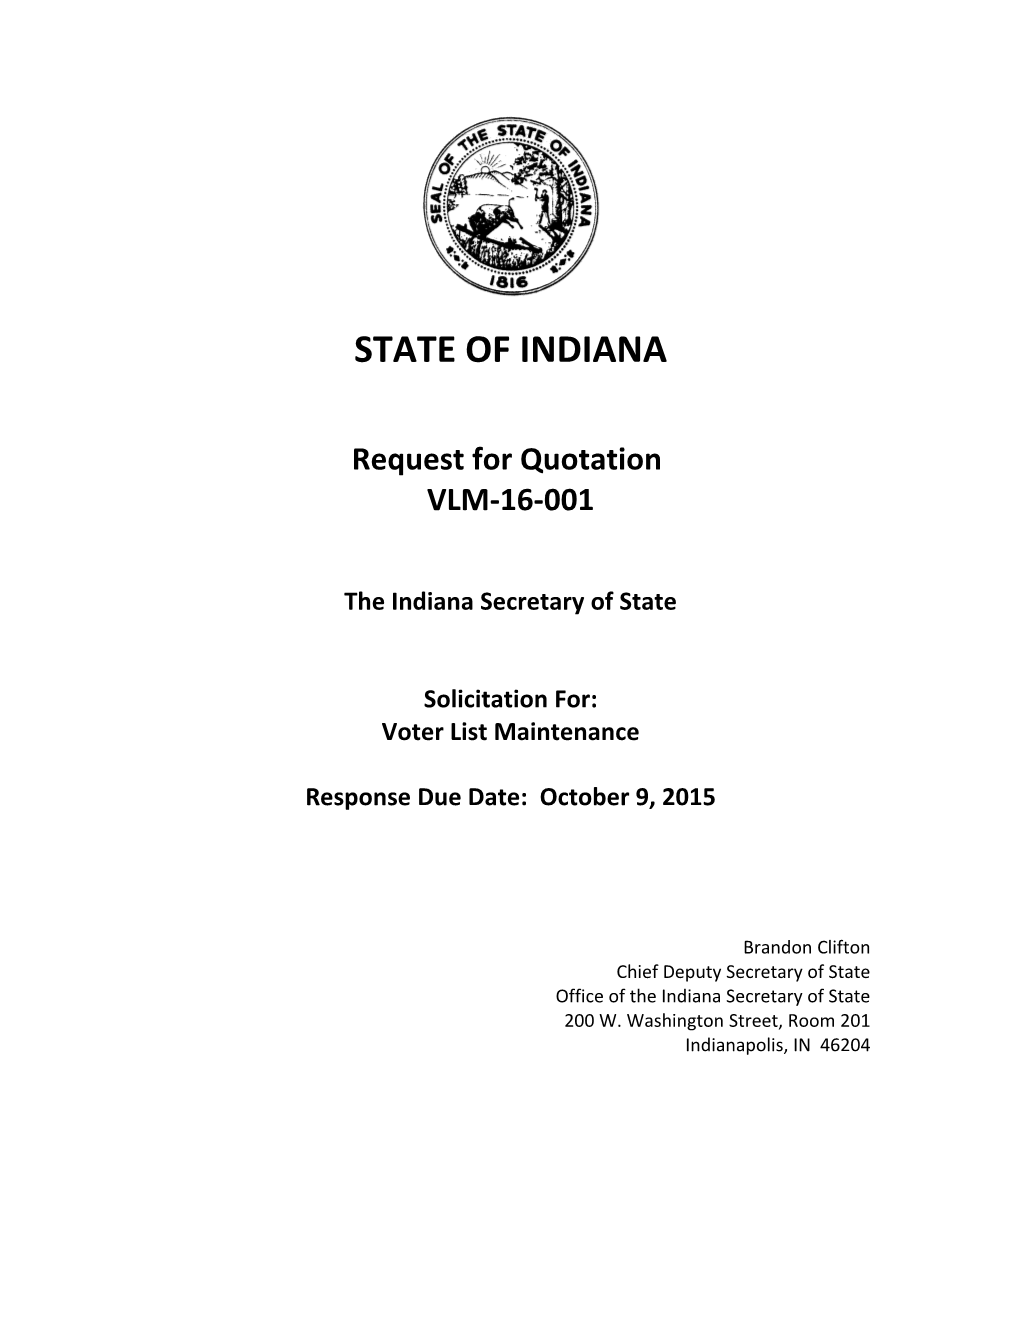 The Indiana Secretary of State